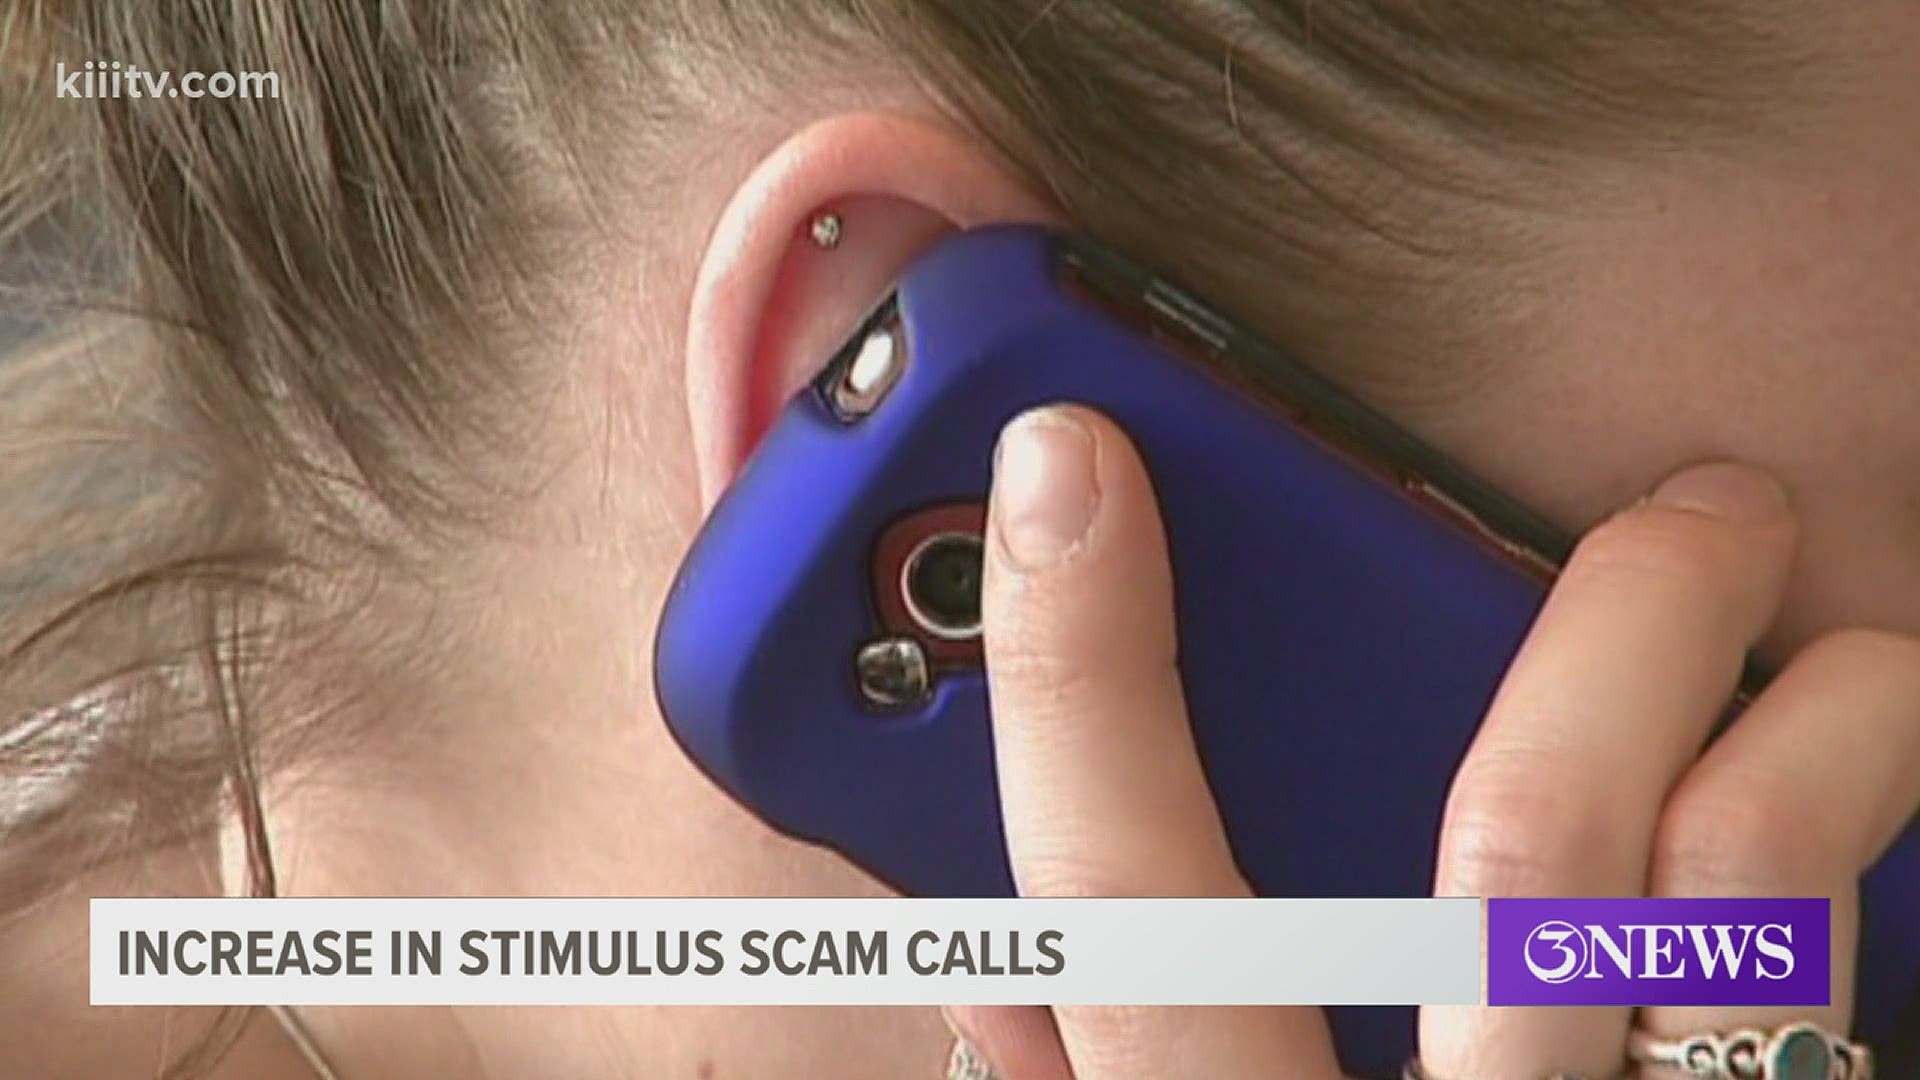 The Better Business Bureau has put out a warning to be wary of phone scams aimed at stealing your federal stimulus check.